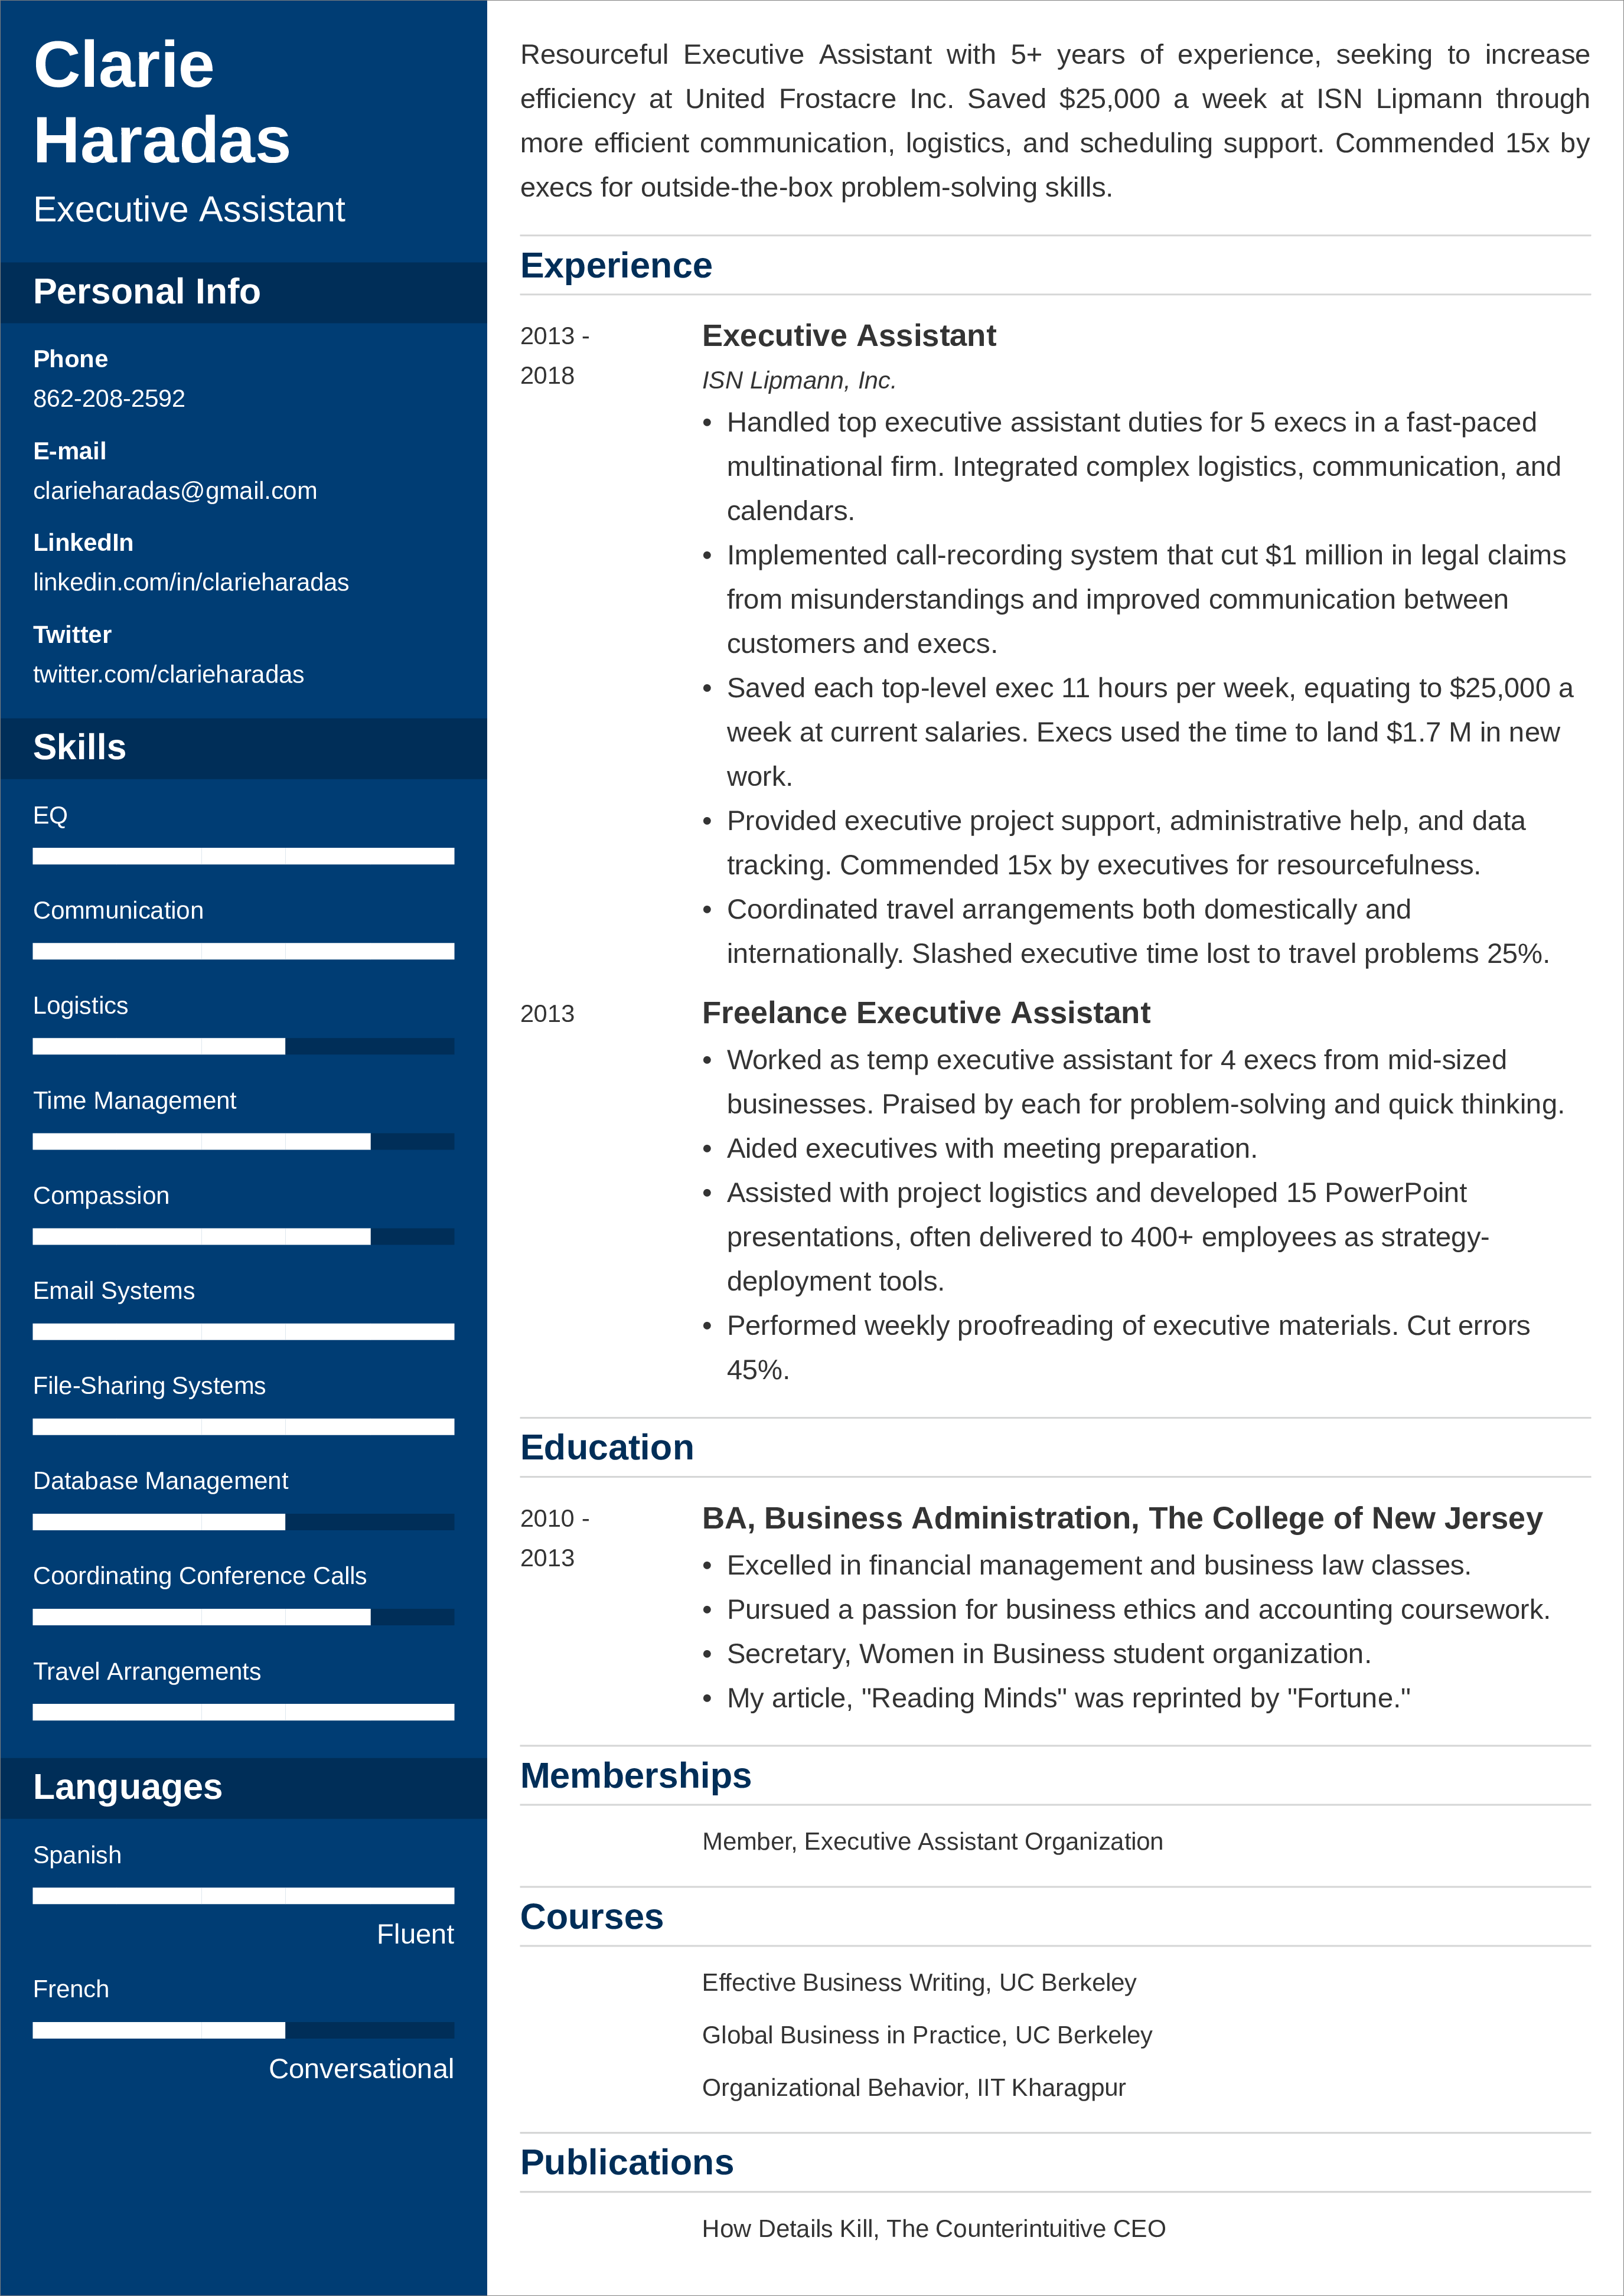 Resume submit email